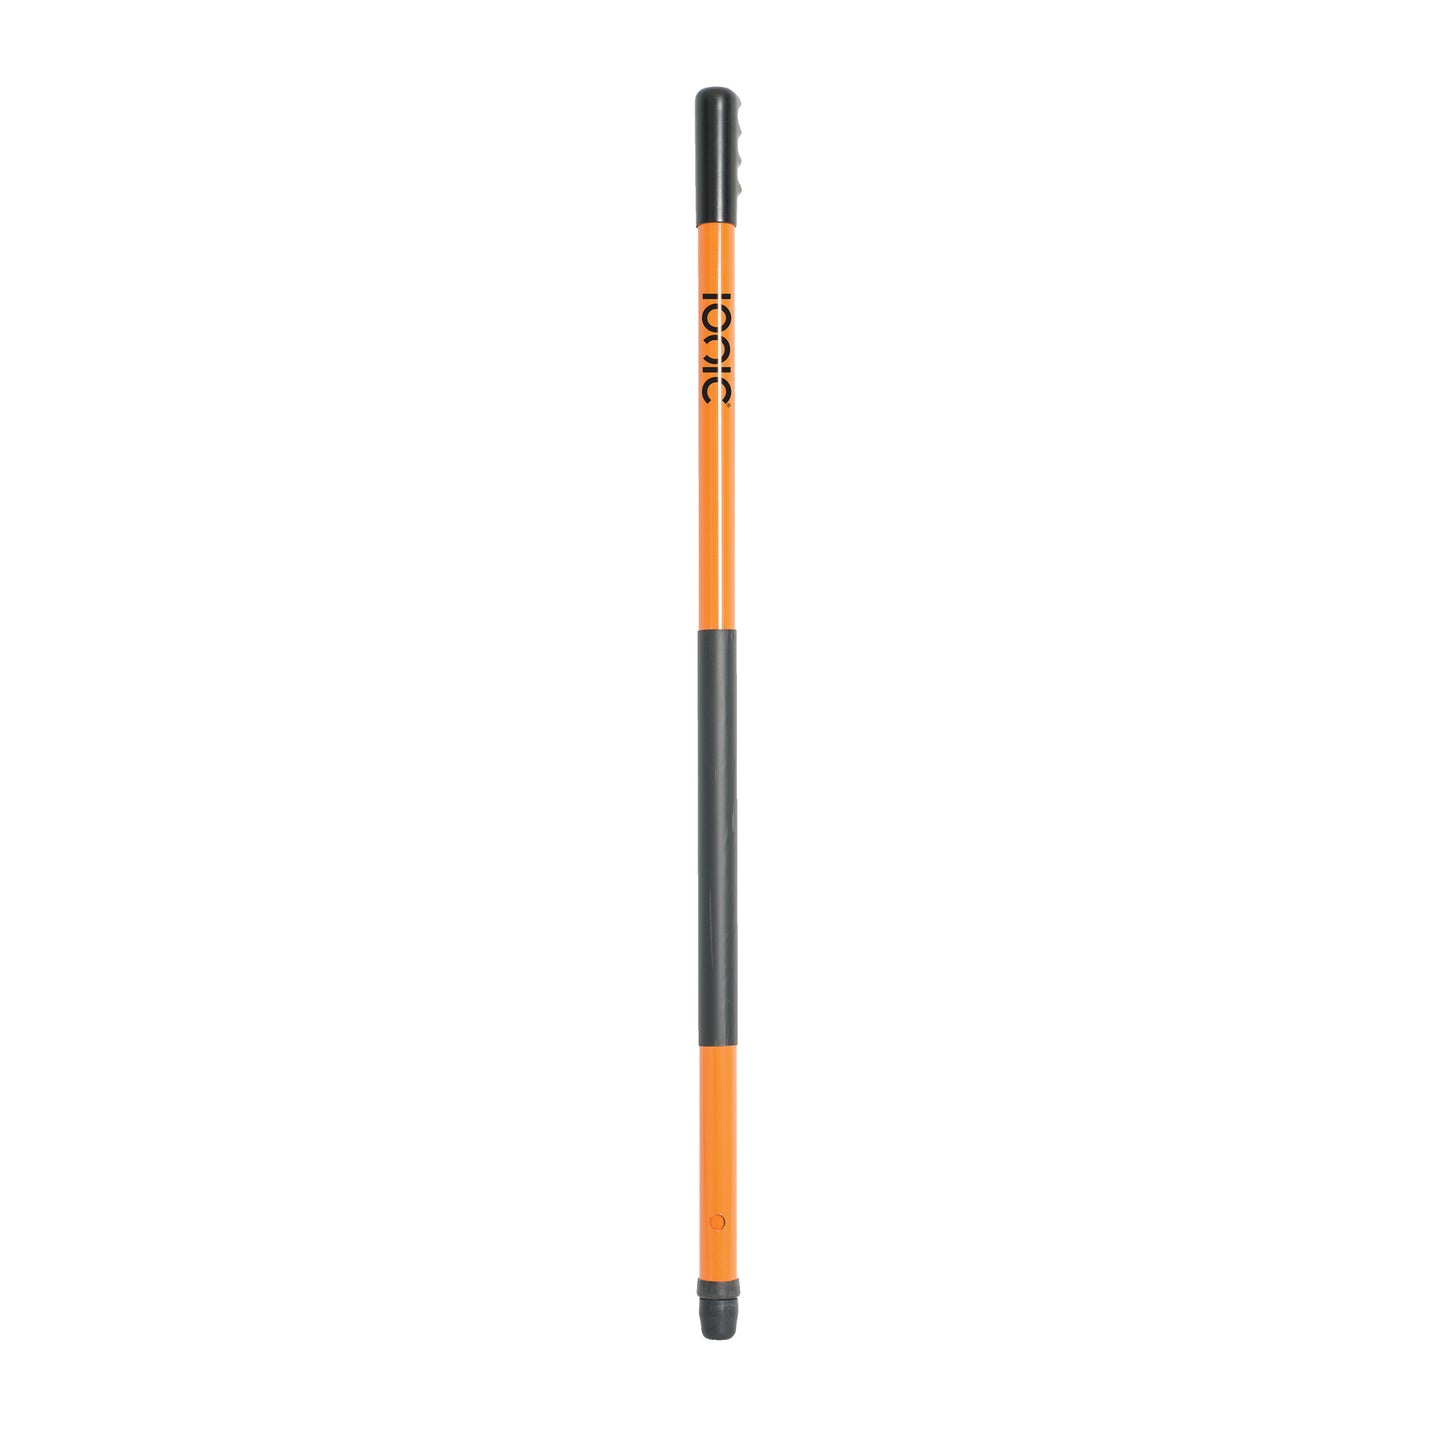 IONIC Telescopic Floating Wading/Search Pole